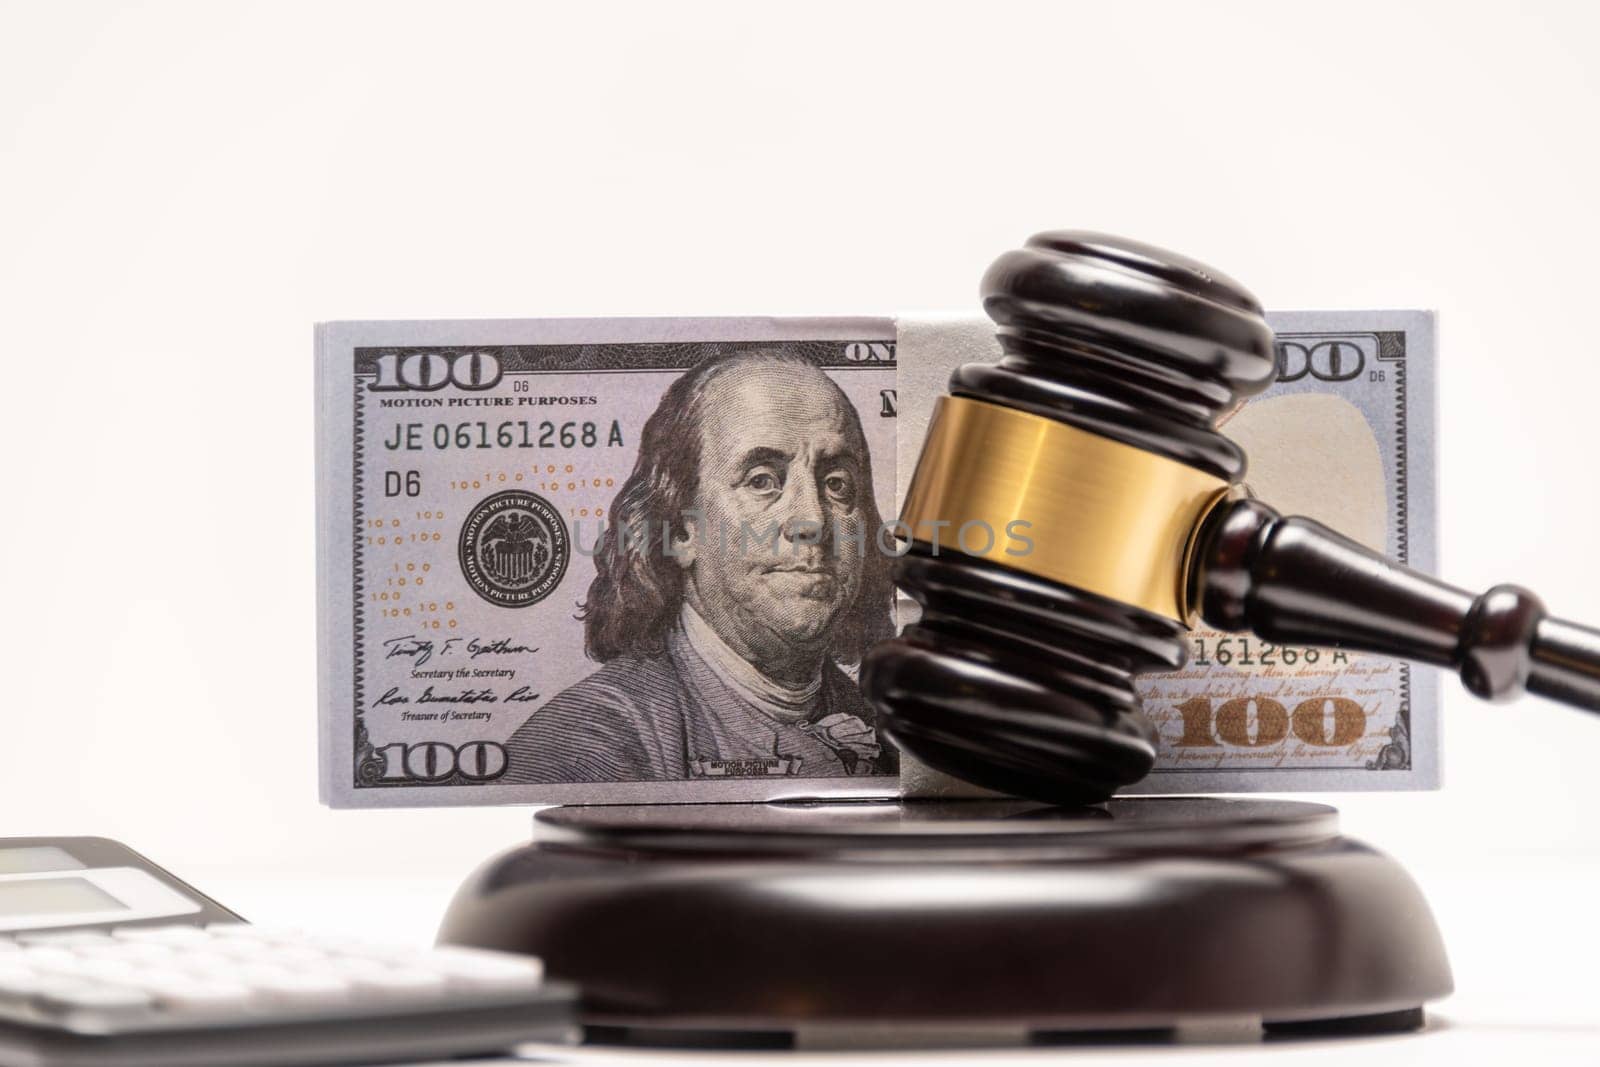 An isolated image of a judge's gavel on a stack of cash with a calculator, signifying legal fines or bail